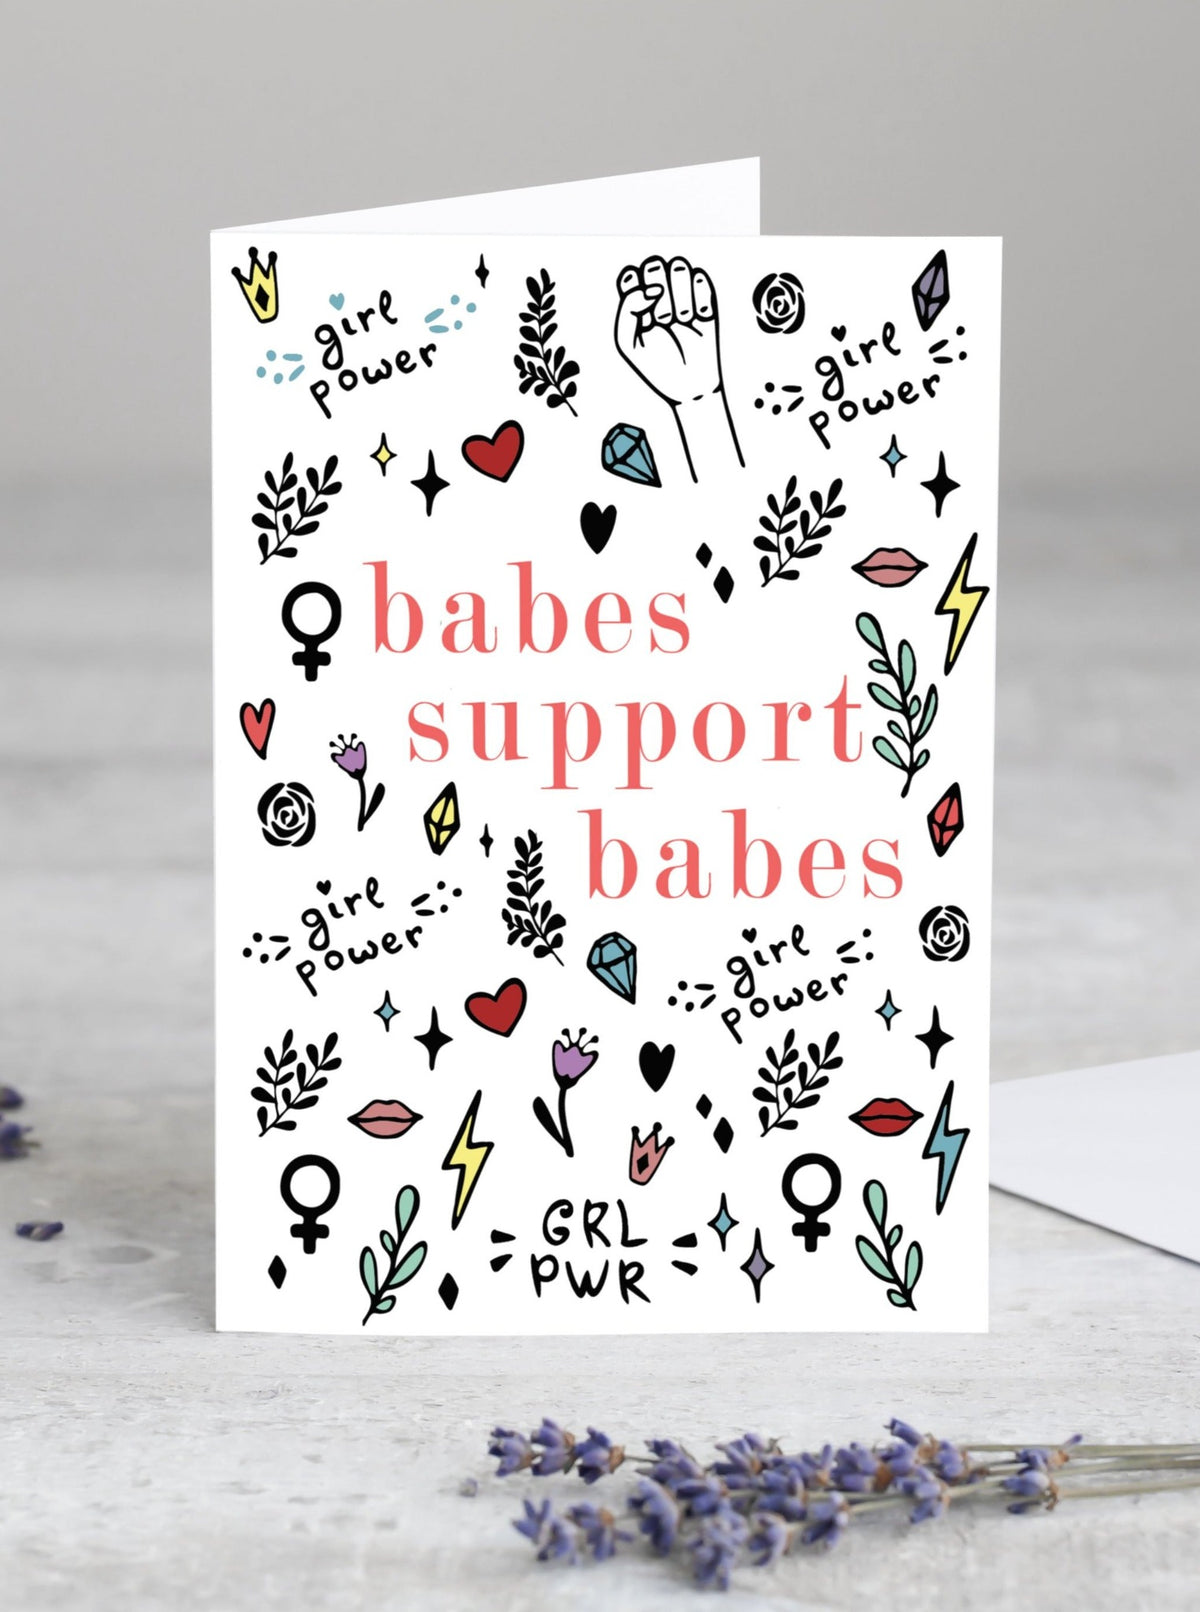 Babes Support Babes Greeting Card Set,Gift for Friend,Card for Co-worker,Feminist Card,Girl Power Card,Girl Boss Card,Designed + Made in USA